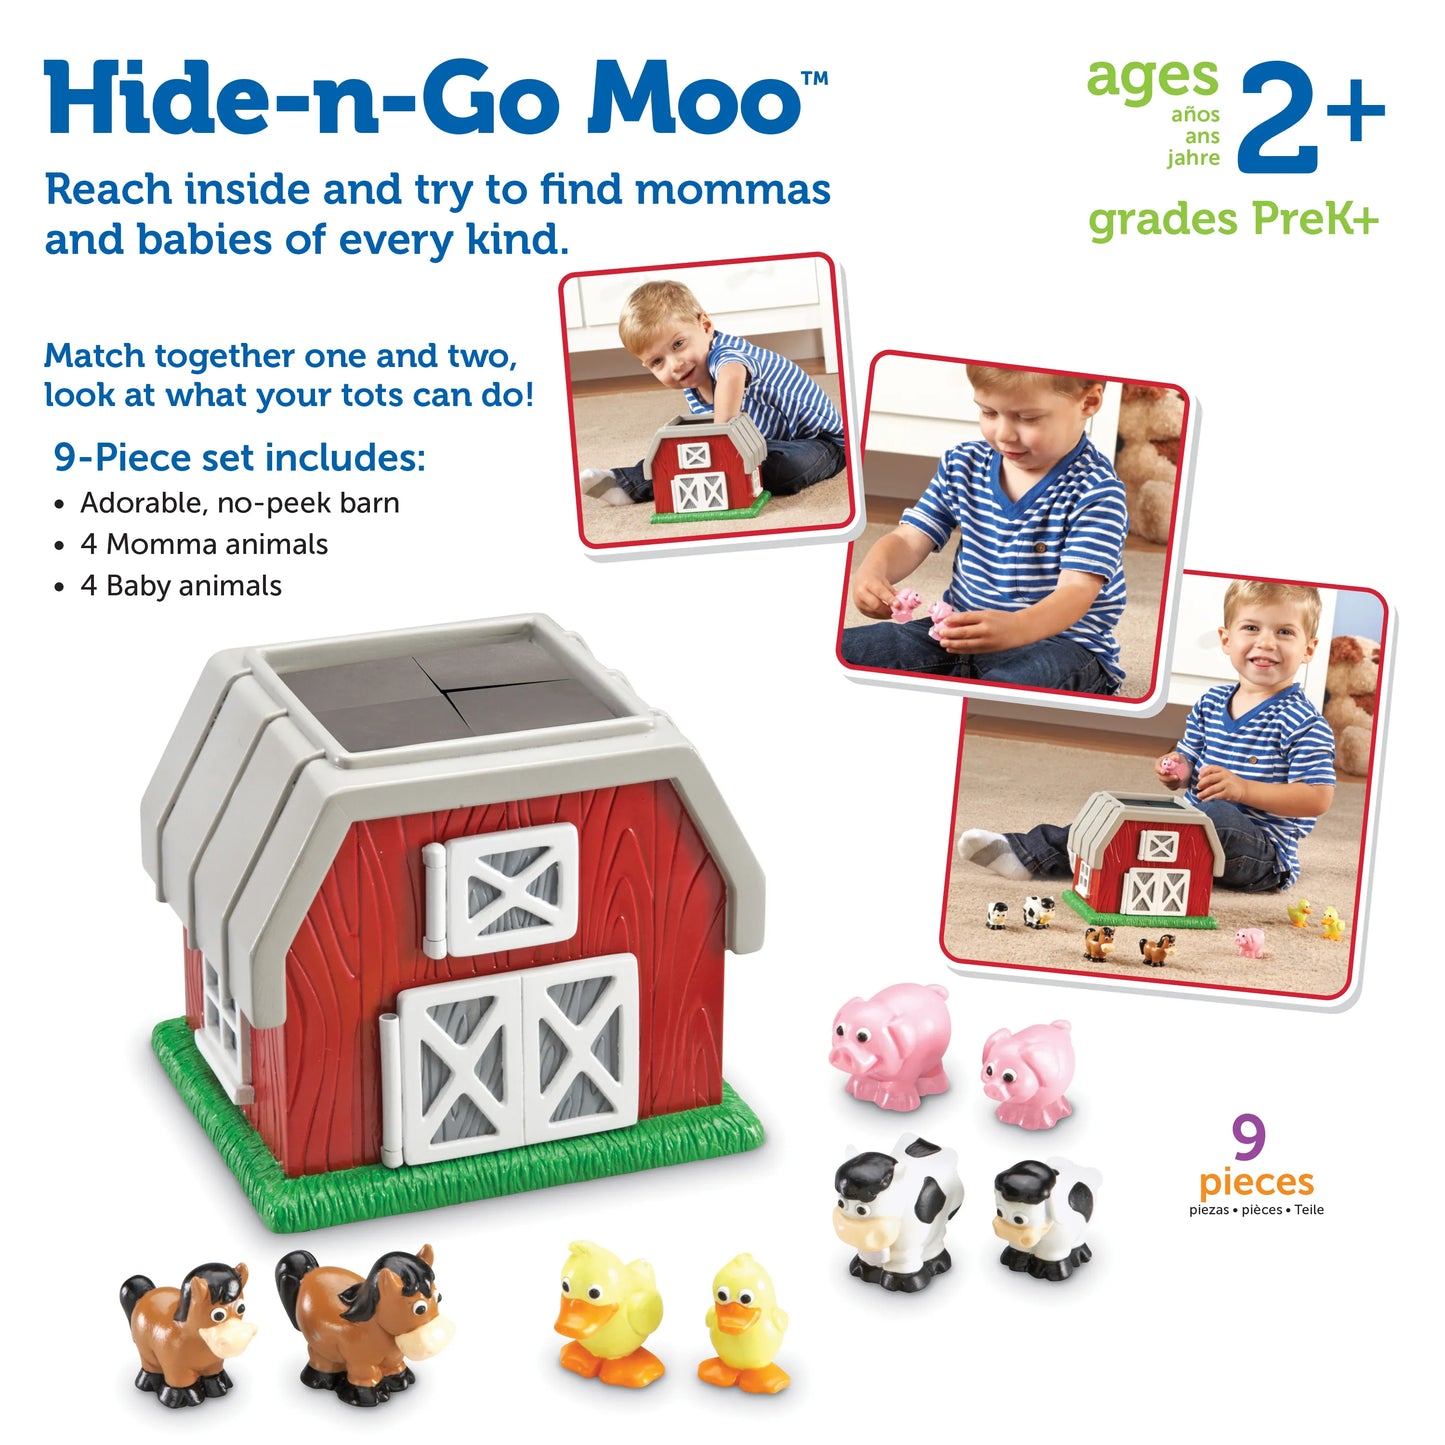 Learning Resources Hide-n-Go Moo